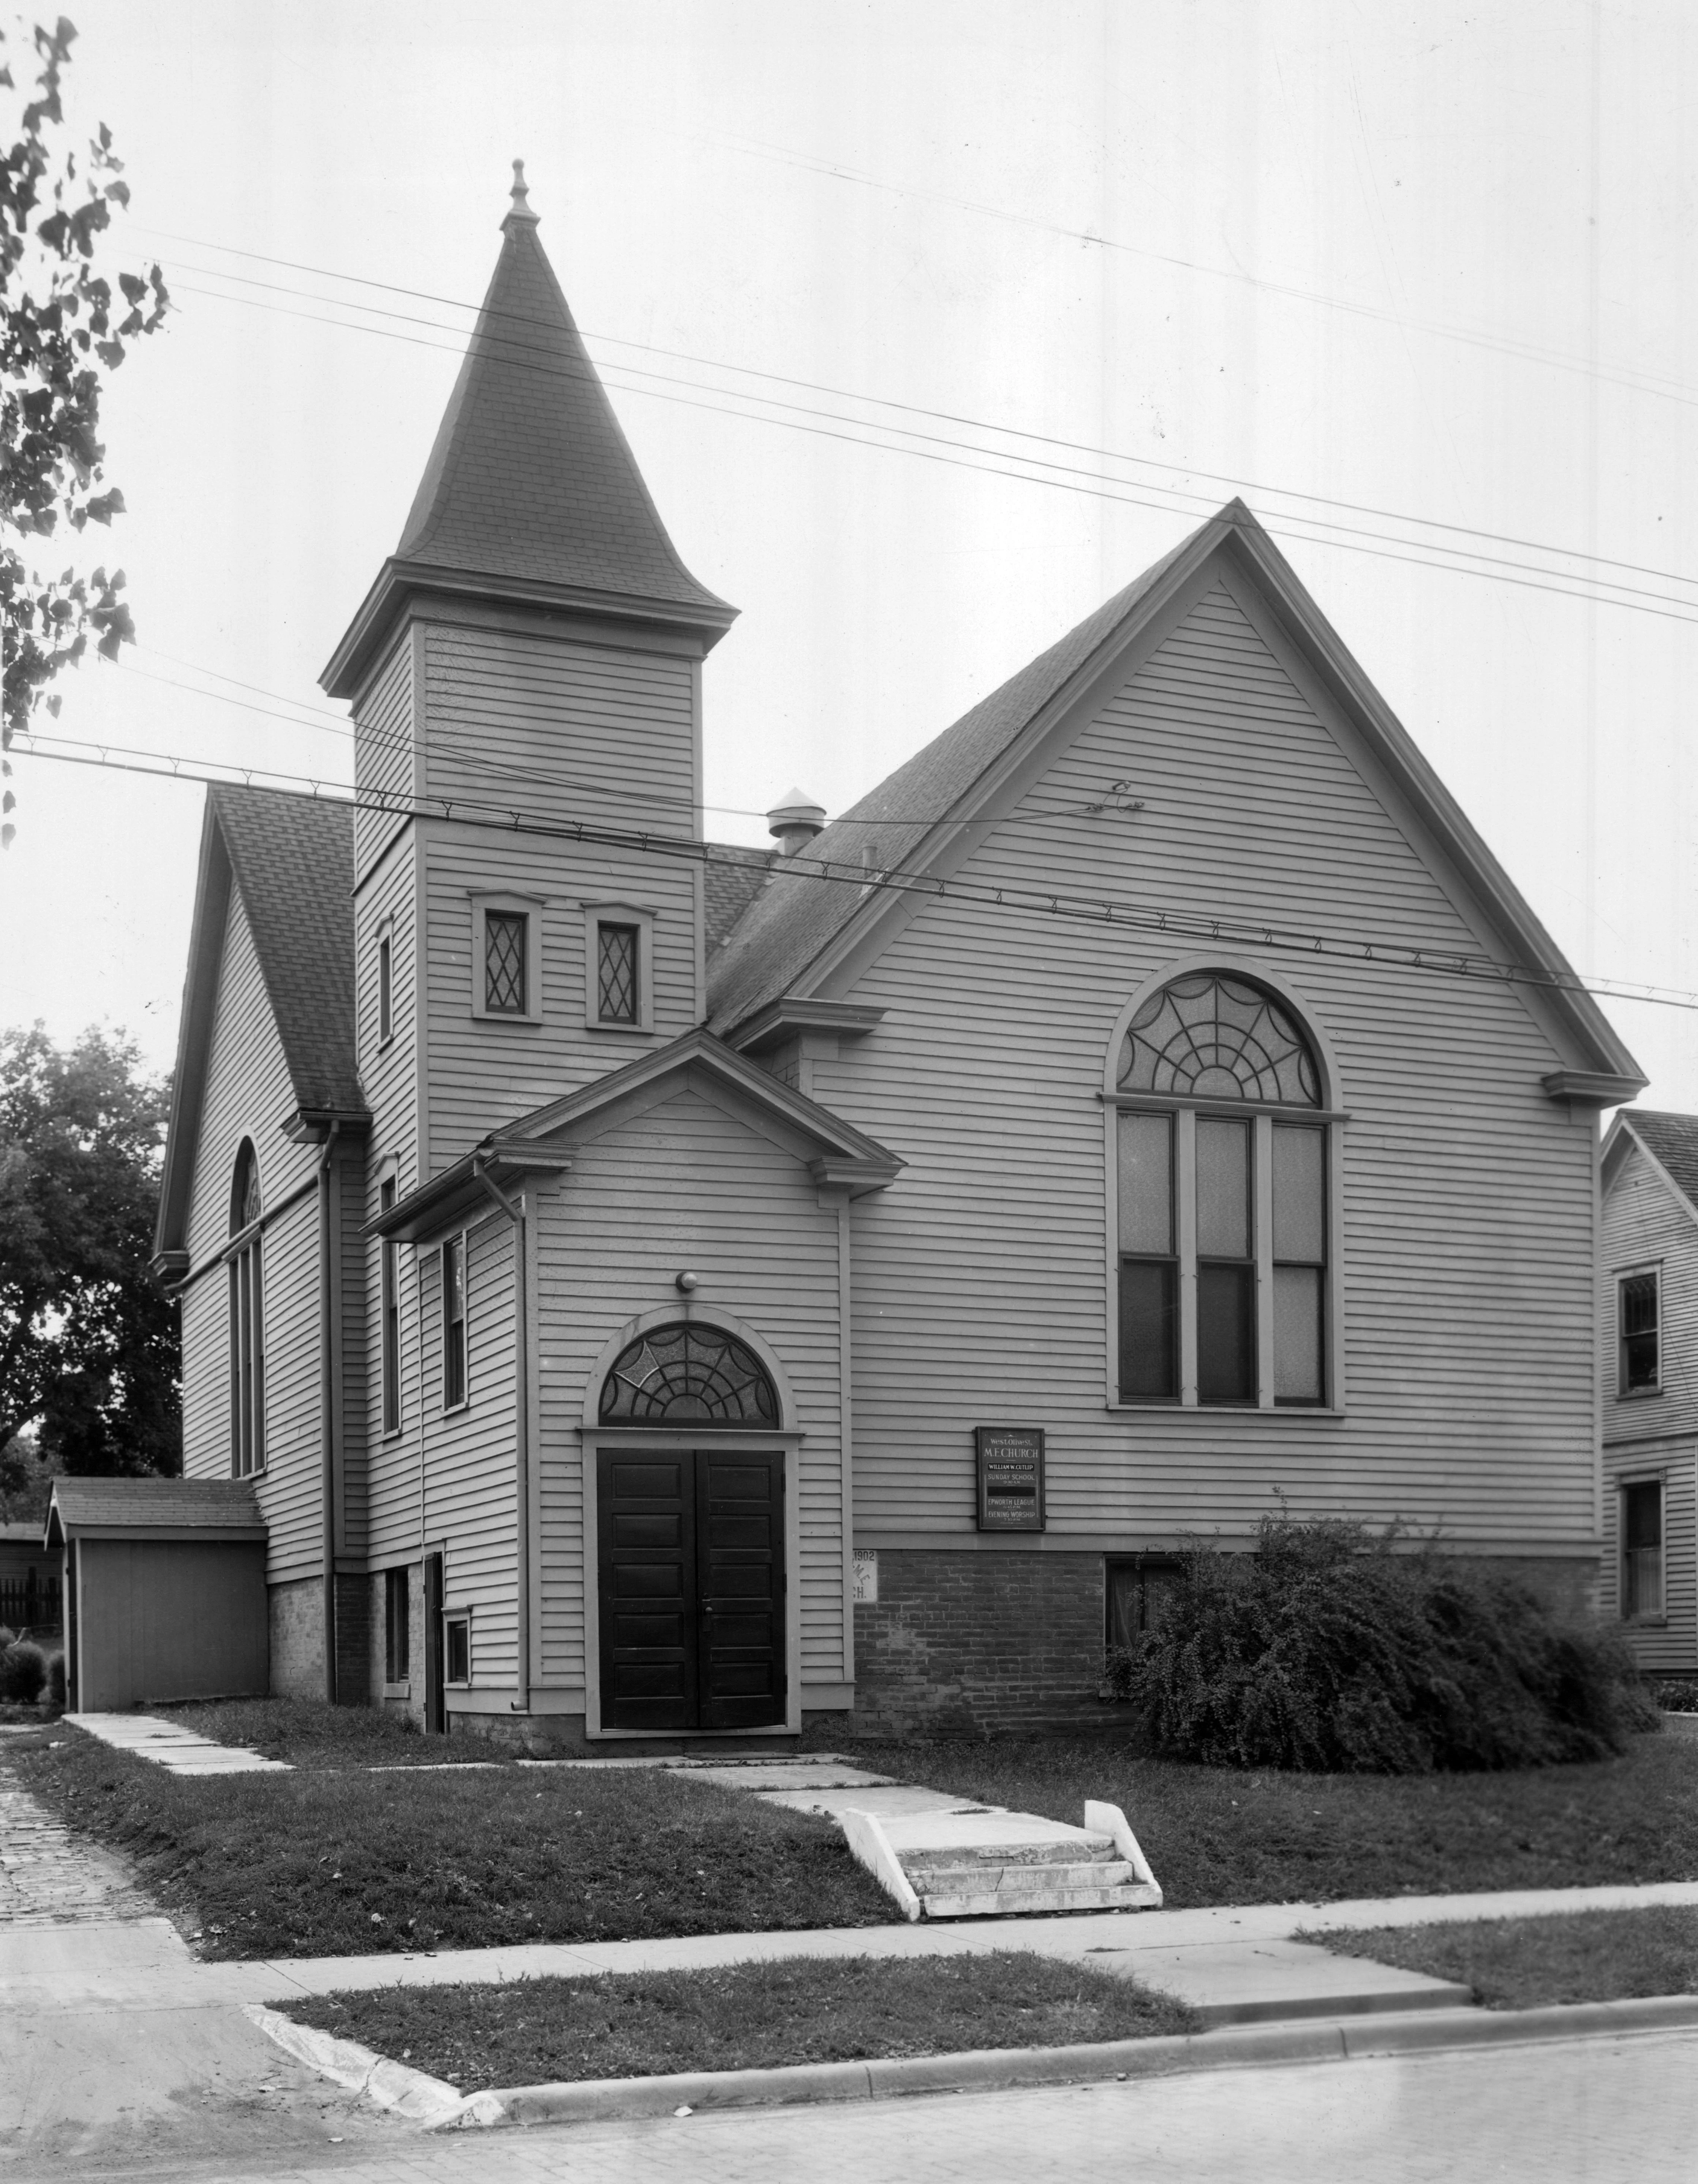 Black and white photo of a light colored church with wood siding and tall steeple.